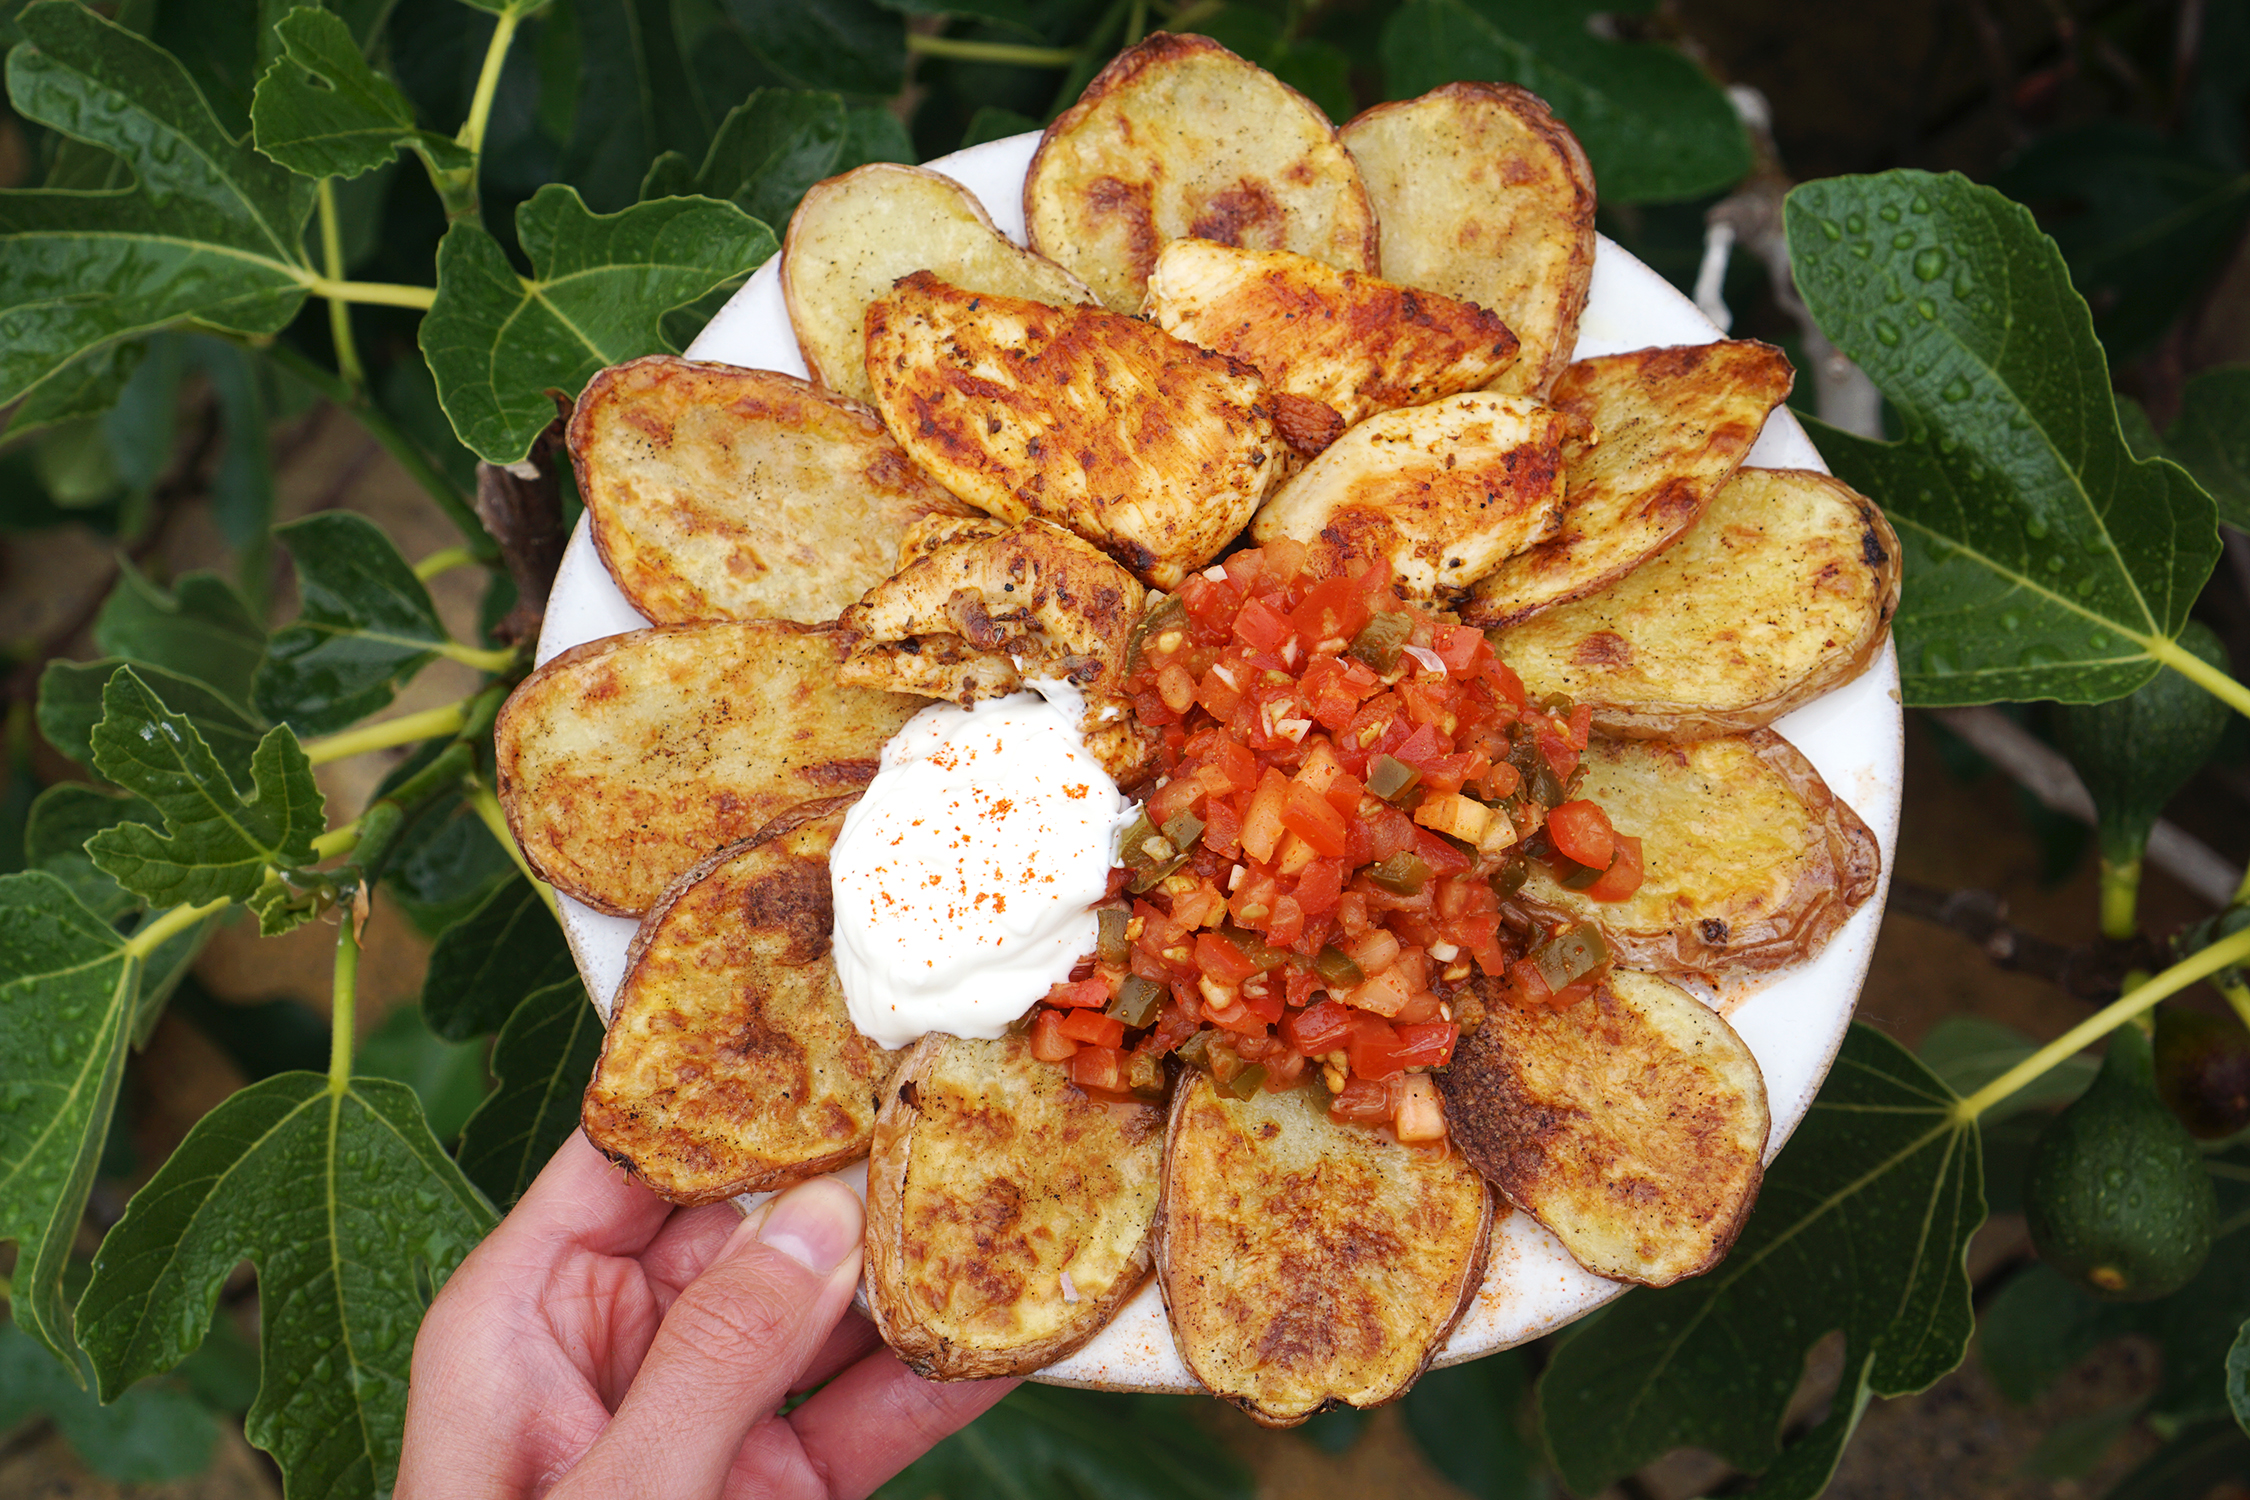 Easy spicy pickled jalapeño salsa with crispy baked potato slices (cottage fries), chicken and yoghurt